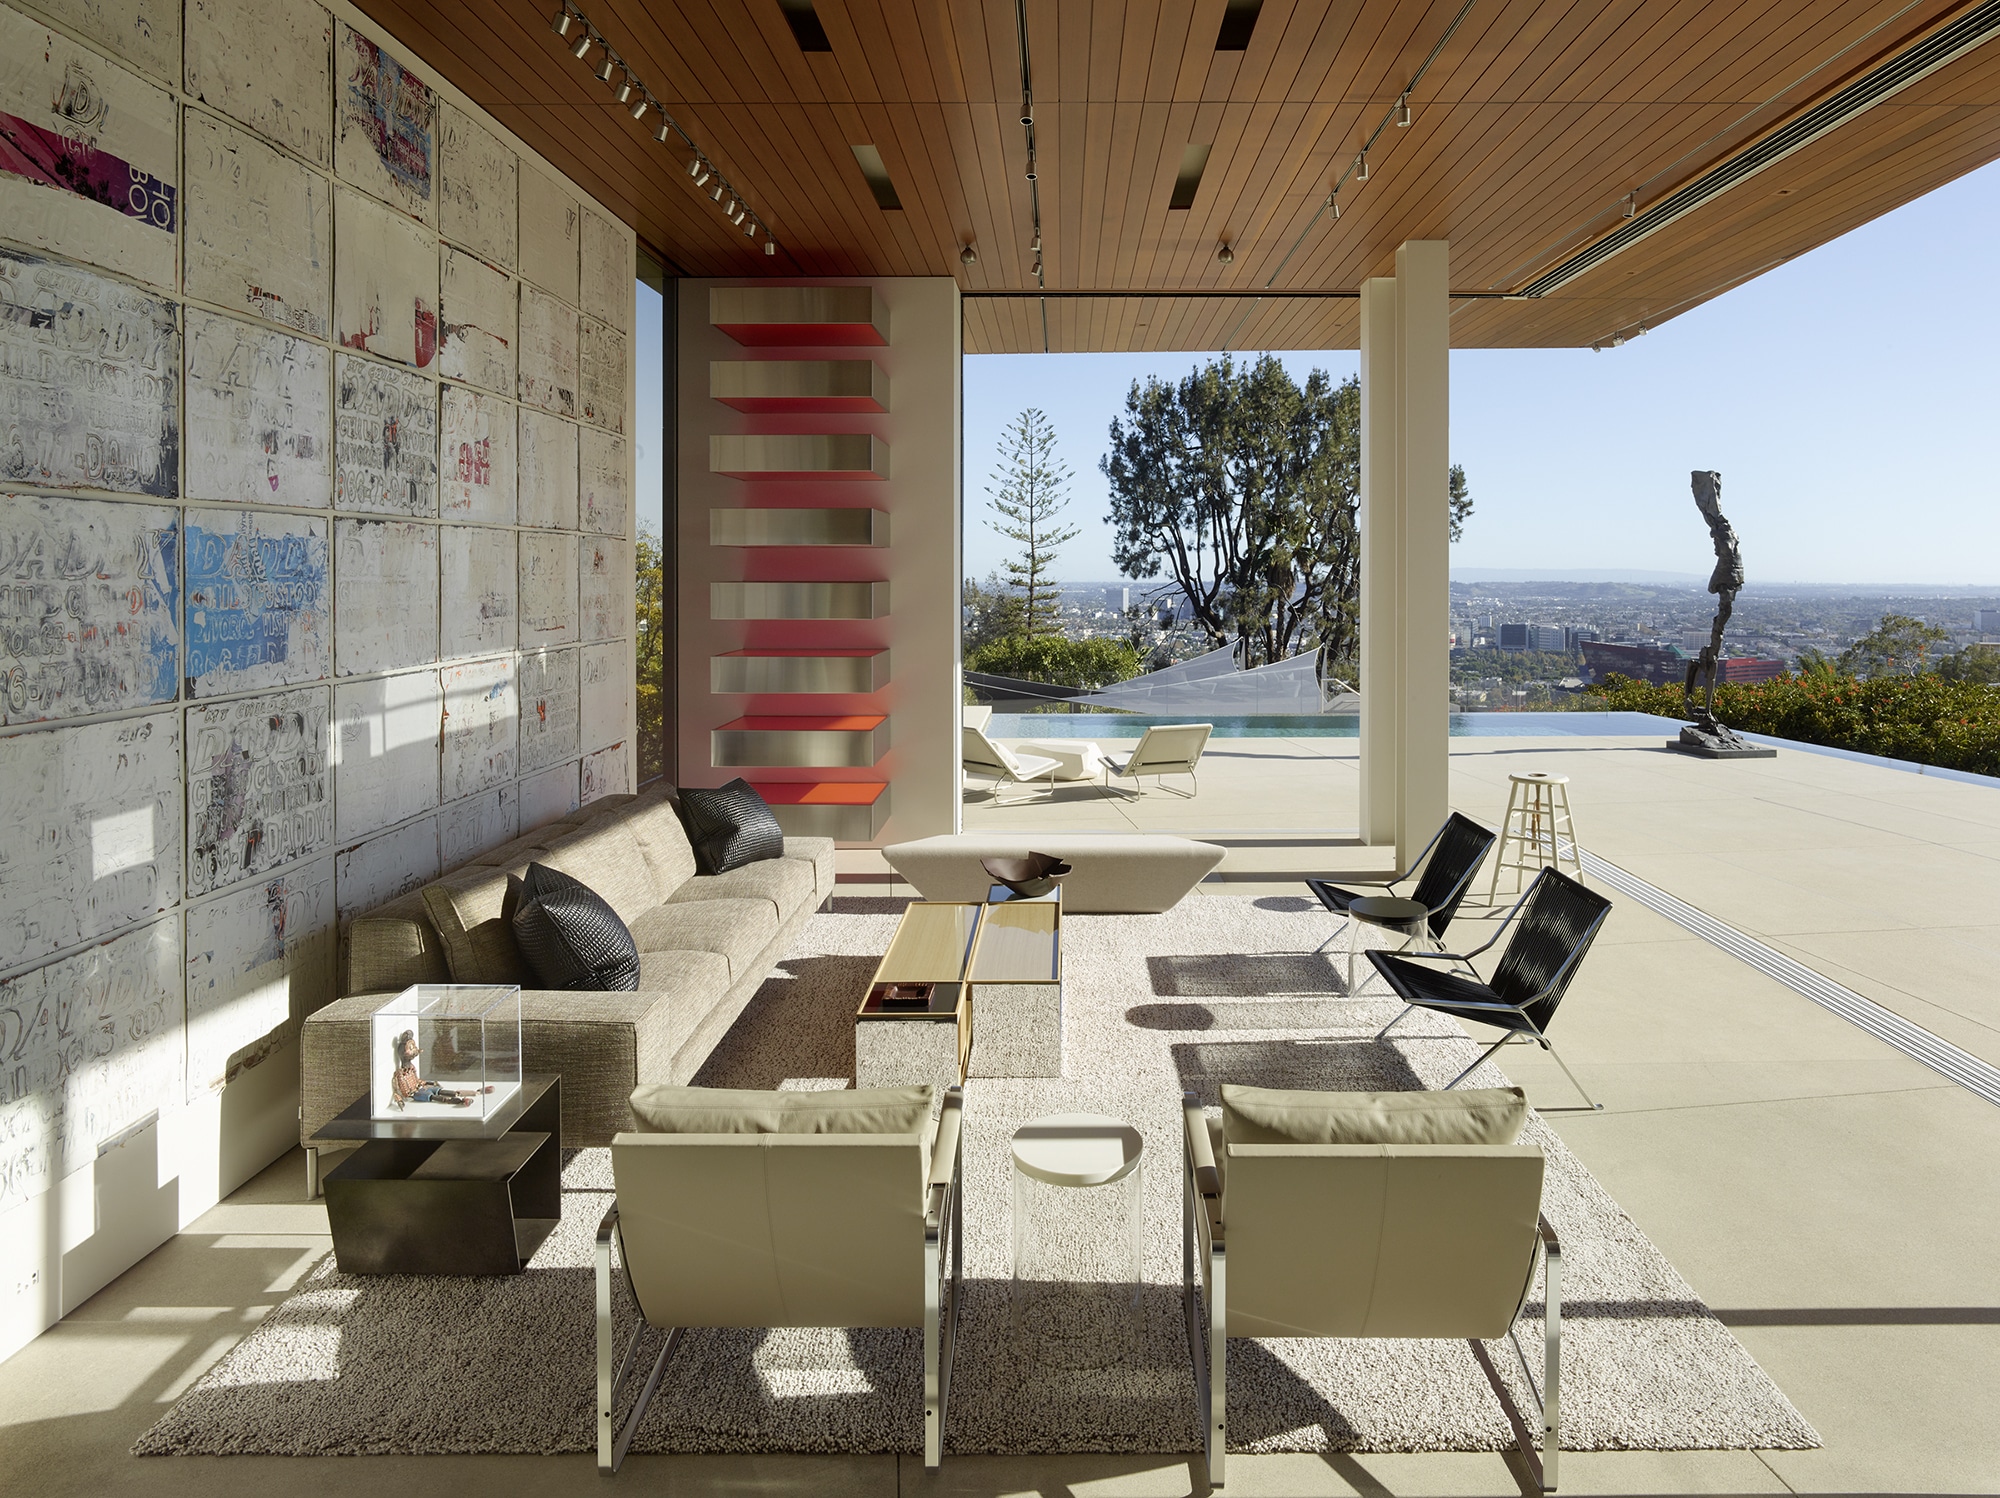 Outdoor entertaining space designed by Gary Hutton. Large seating area with wood ceiling and views of the city.